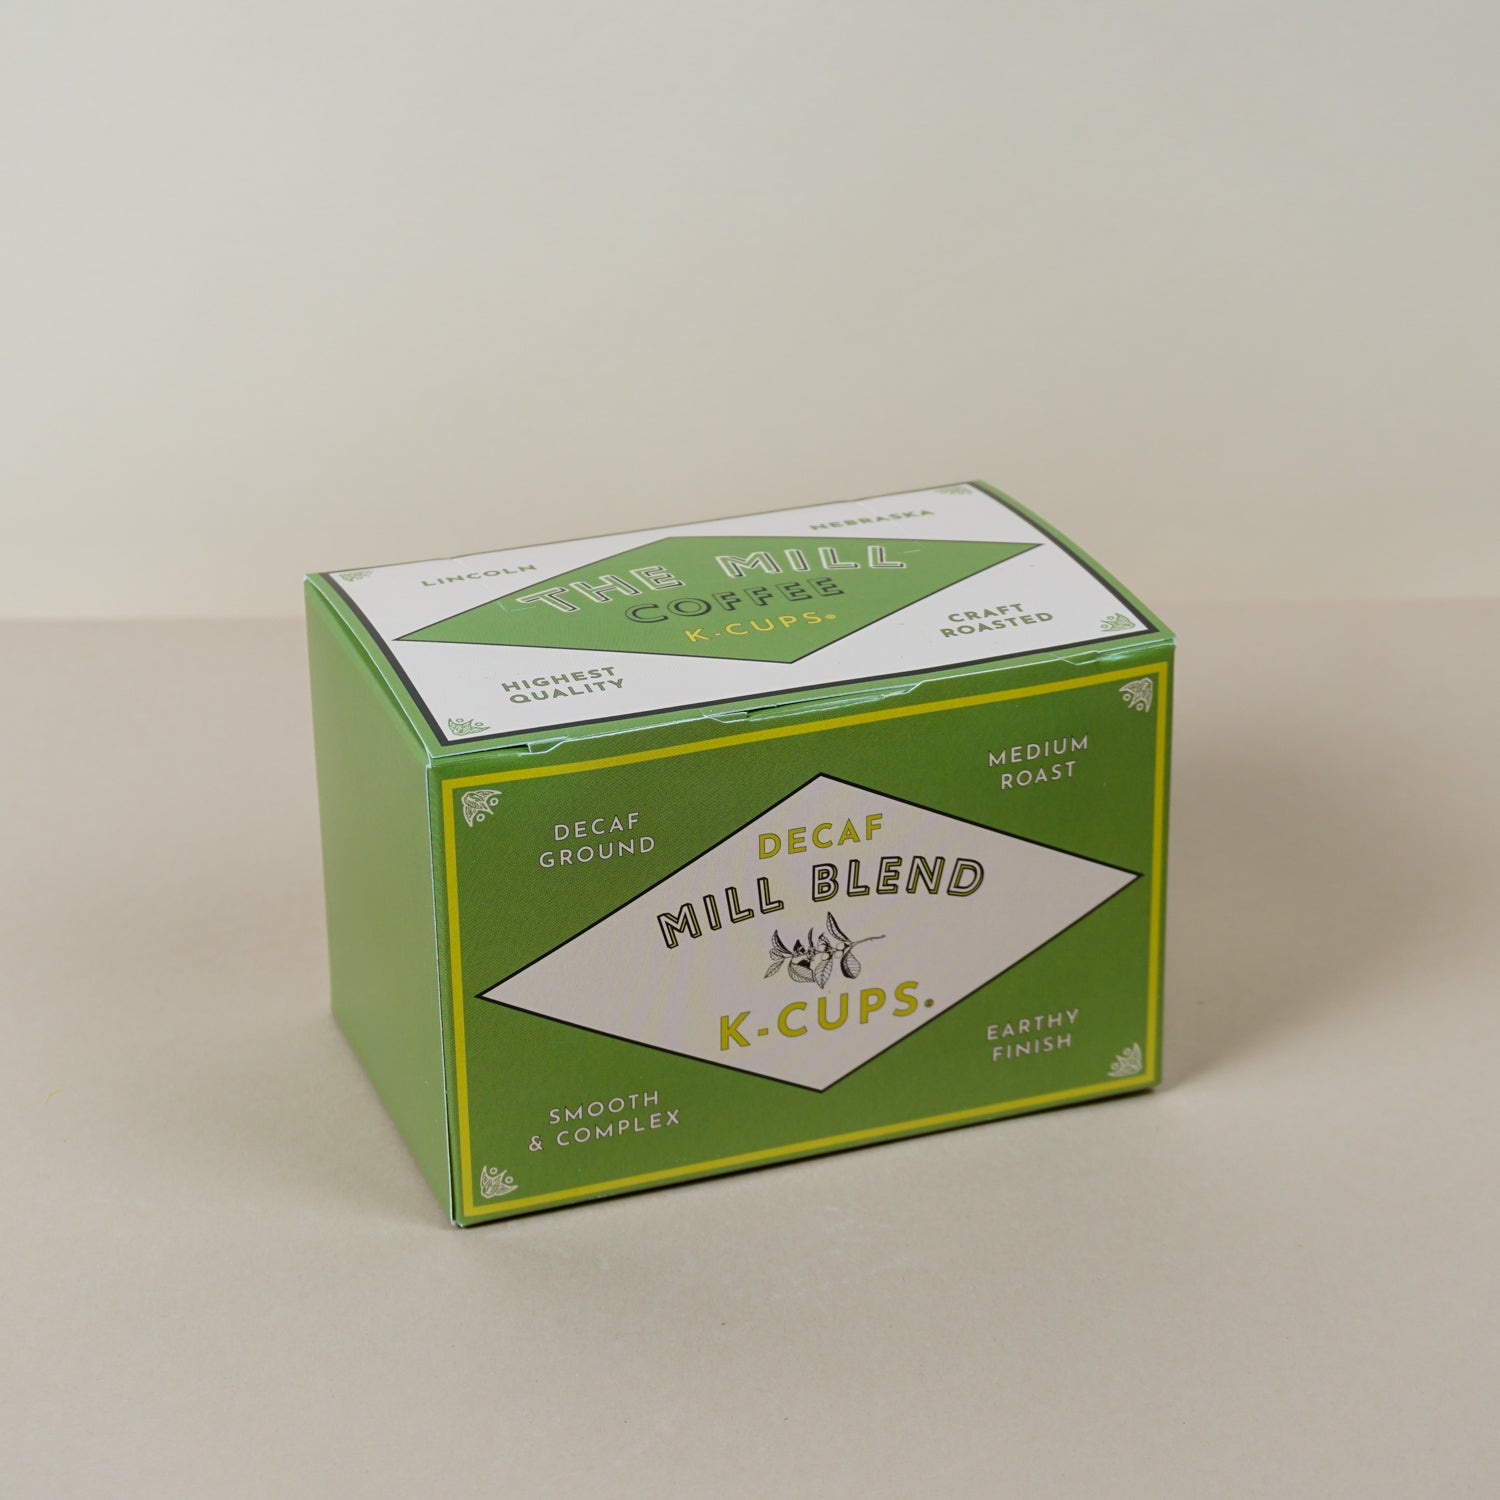 The Mill K-Cups